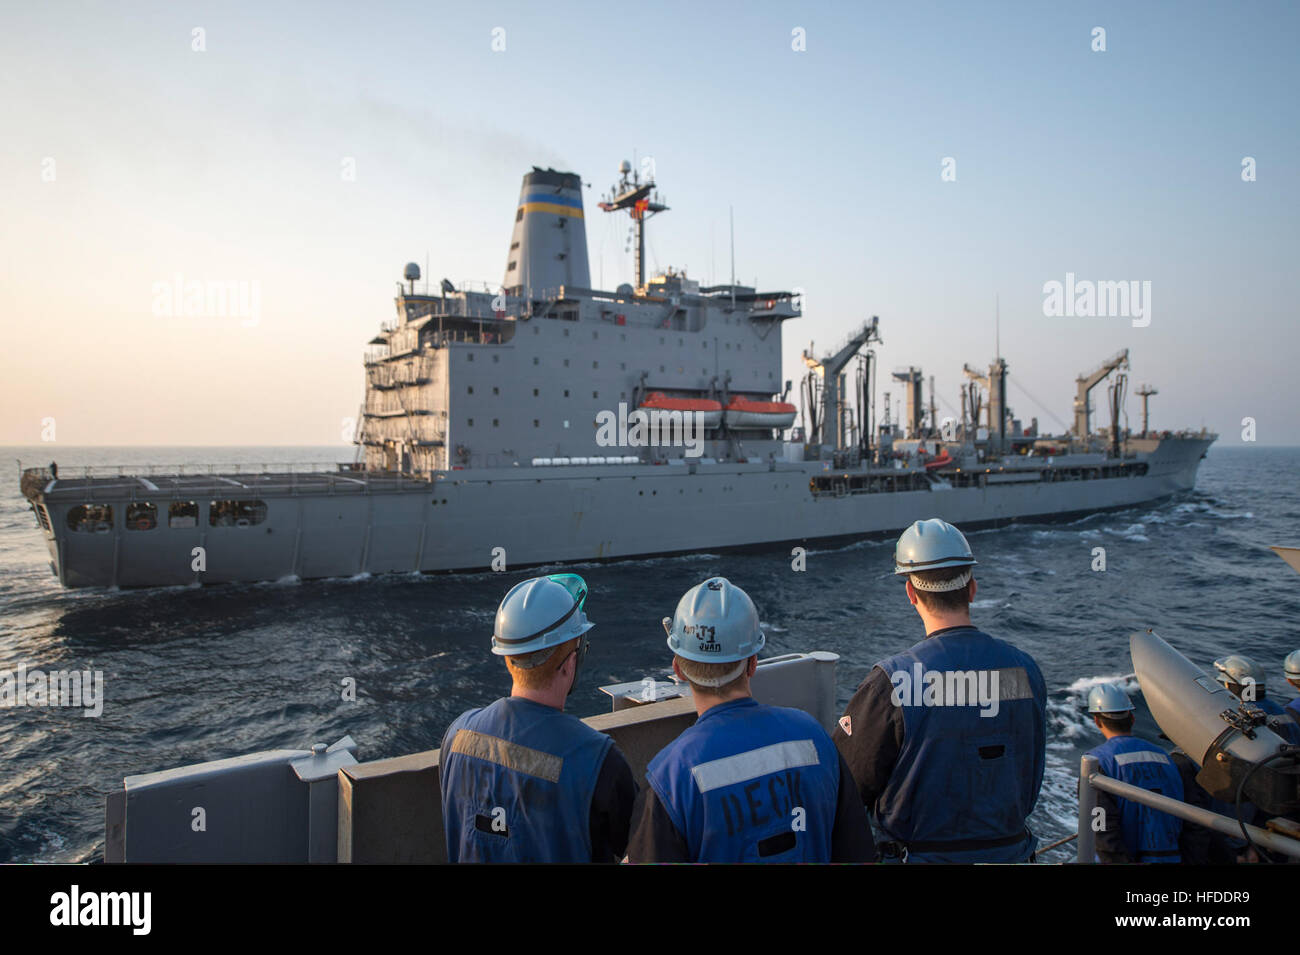 U.S. Sailors assigned to the amphibious transport dock ship USS Denver (LPD 9) stand by before conducting a replenishment at sea with the fleet replenishment oiler USNS Rappahannock (T-AO 204) in the East China Sea March 27, 2014. The Denver was part of the Bonhomme Richard Amphibious Ready Group and was participating in exercise Ssang Yong 14, a combined U.S.-South Korean combat readiness and joint/combined interoperability exercise designed to advance South Korean command and control capabilities through amphibious operations. (U.S. Navy photo by Mass Communication Specialist 3rd Class Todd  Stock Photo